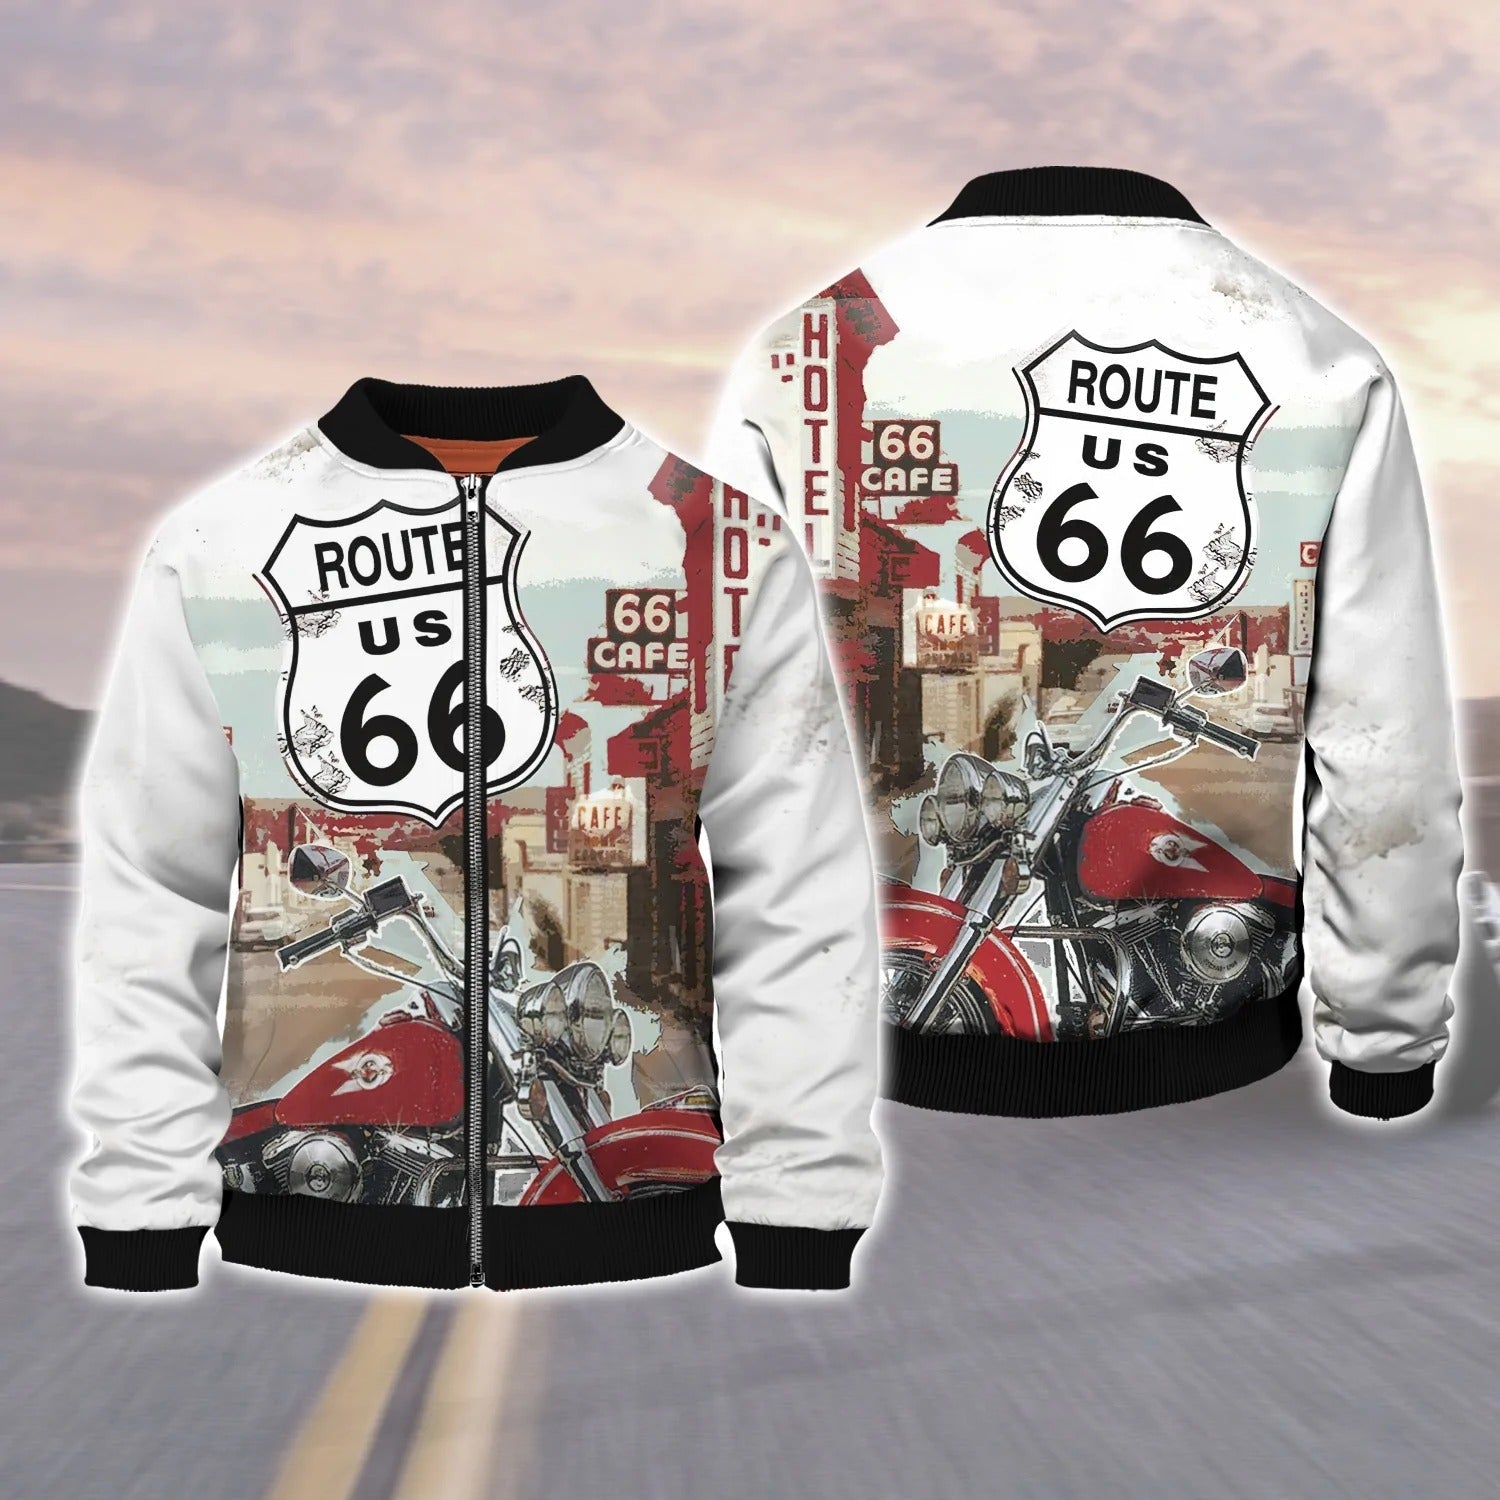 This Biker Conquers Route 66 Cafe 3D T Shirt/ Biker Hoodie Bomber/ Gift For Biker